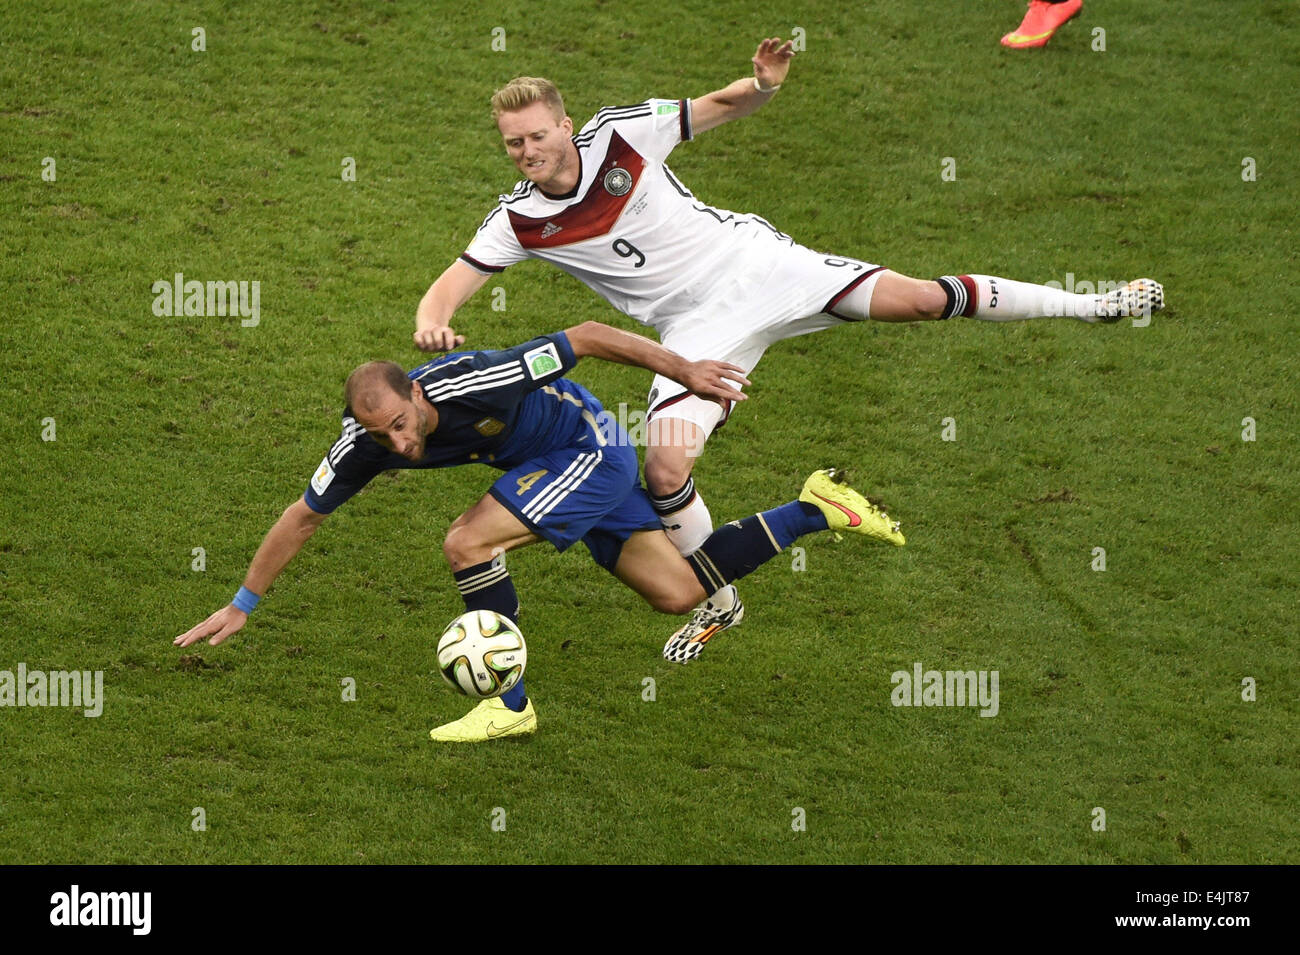 Rio De Janeiro, Brazil. 13th July, 2014. Germany's Andre Schuerrle vies with Argentina's Pablo Zabaleta during the final match between Germany and Argentina of 2014 FIFA World Cup at the Estadio do Maracana Stadium in Rio de Janeiro, Brazil, on July 13, 2014. Credit:  Lui Siu Wai/Xinhua/Alamy Live News Stock Photo